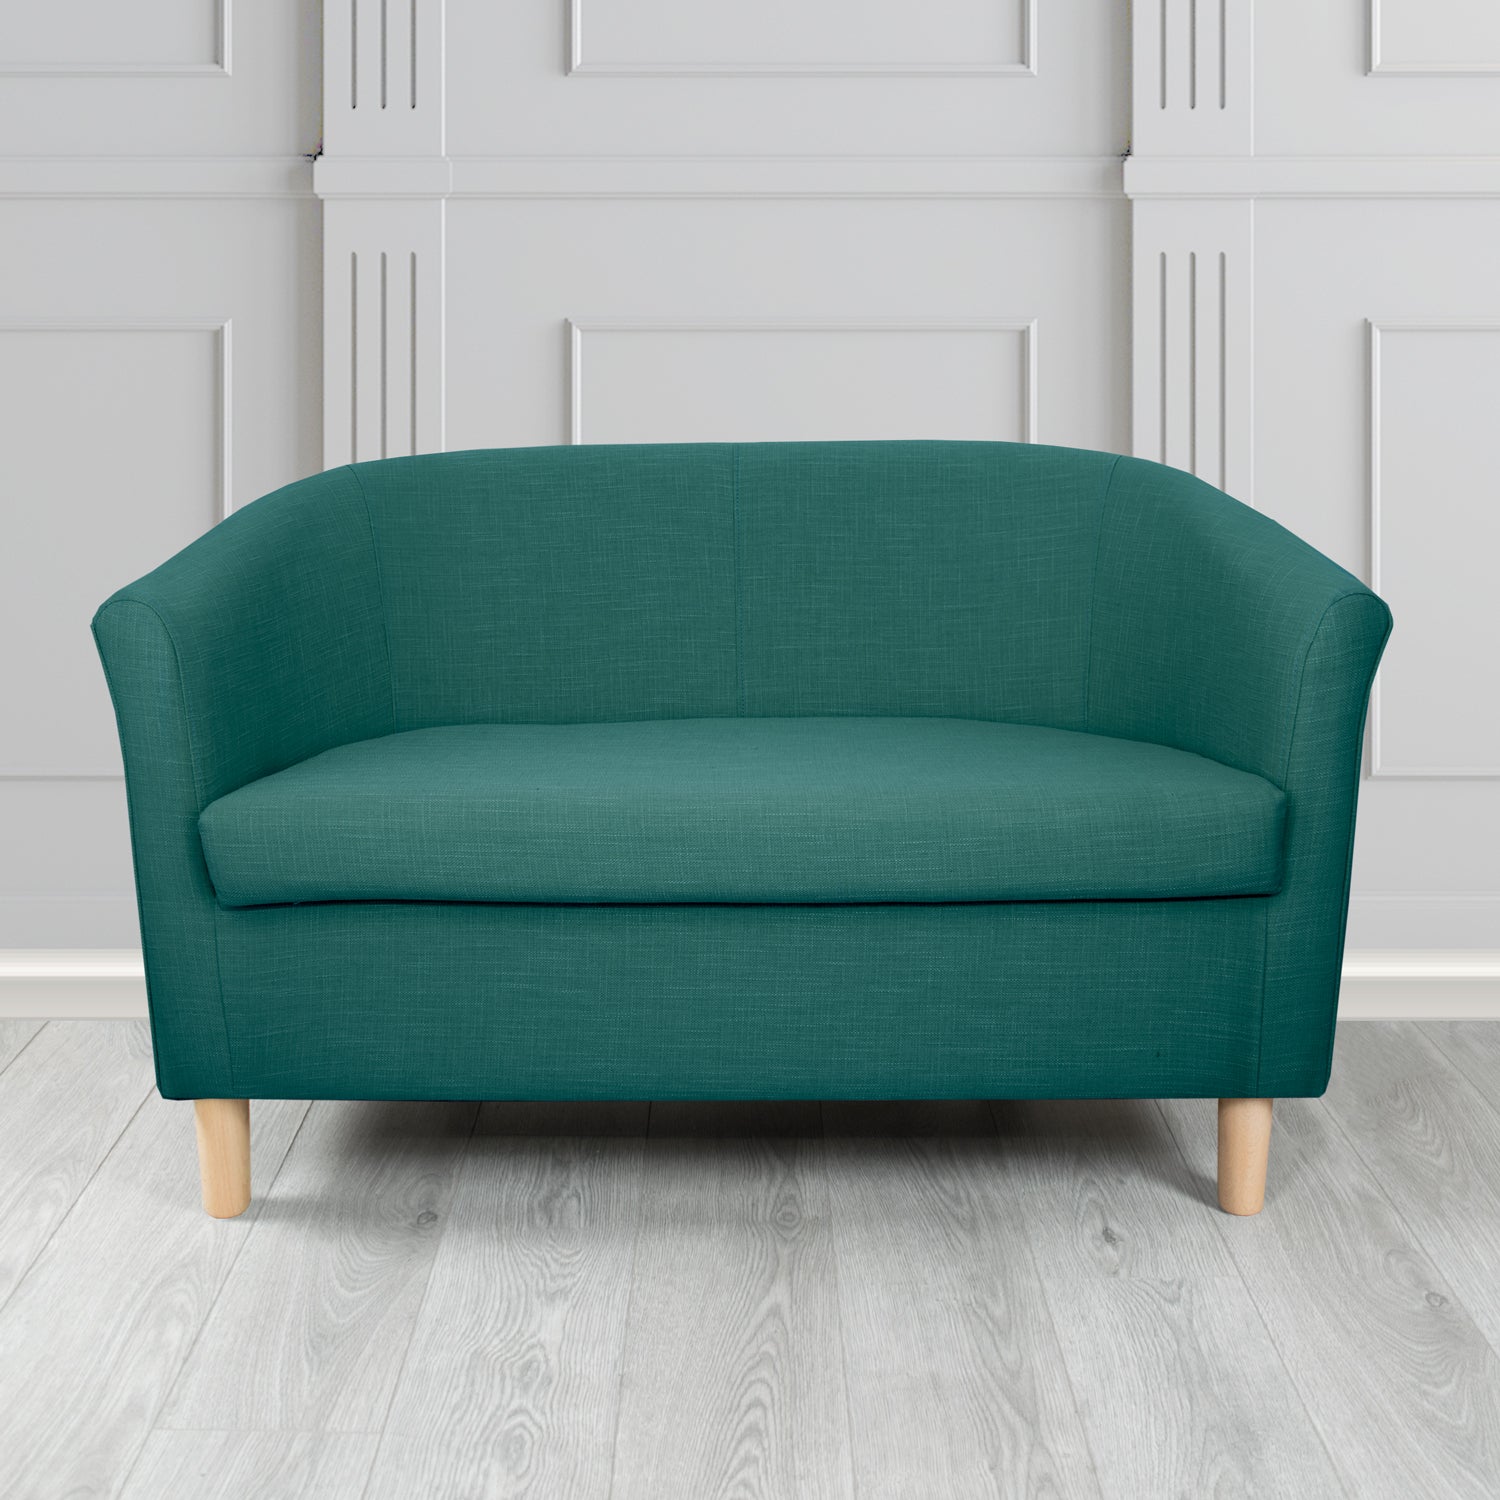 Tuscany 2 Seater Tub Sofa in Emporio Teal EMP510 Linen Crib 5 Fabric - The Tub Chair Shop